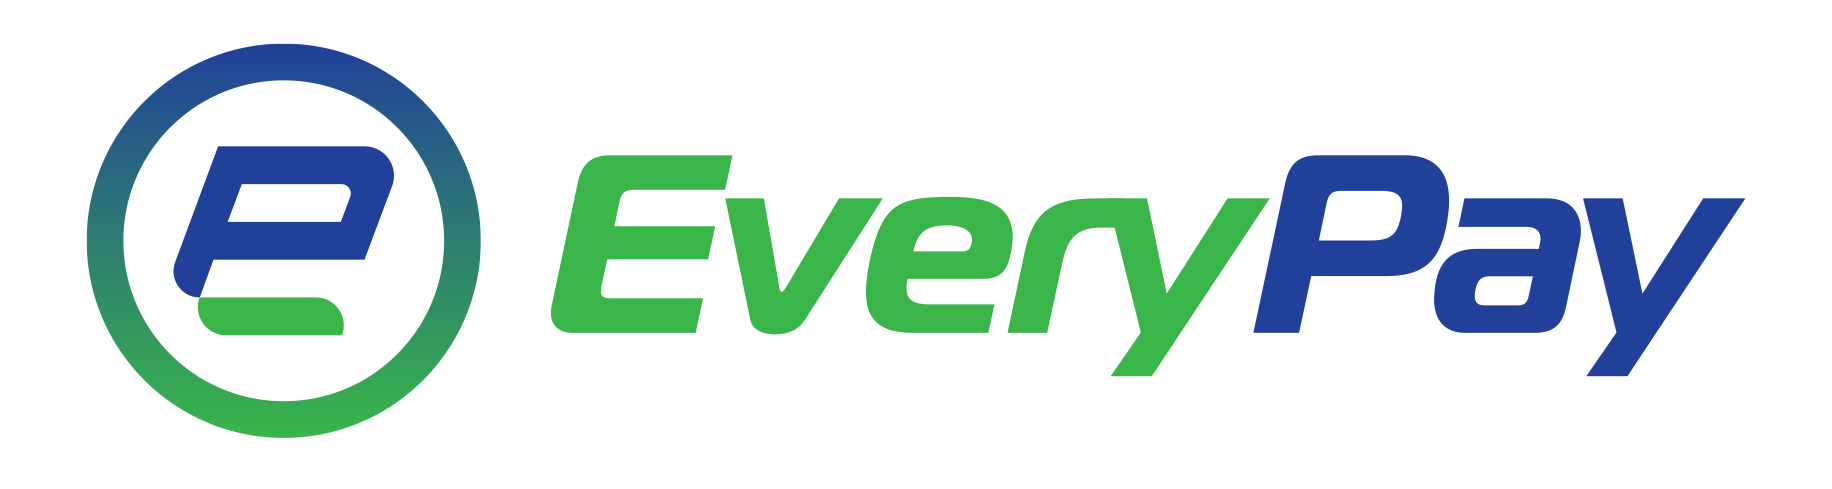 everypay_logo.png